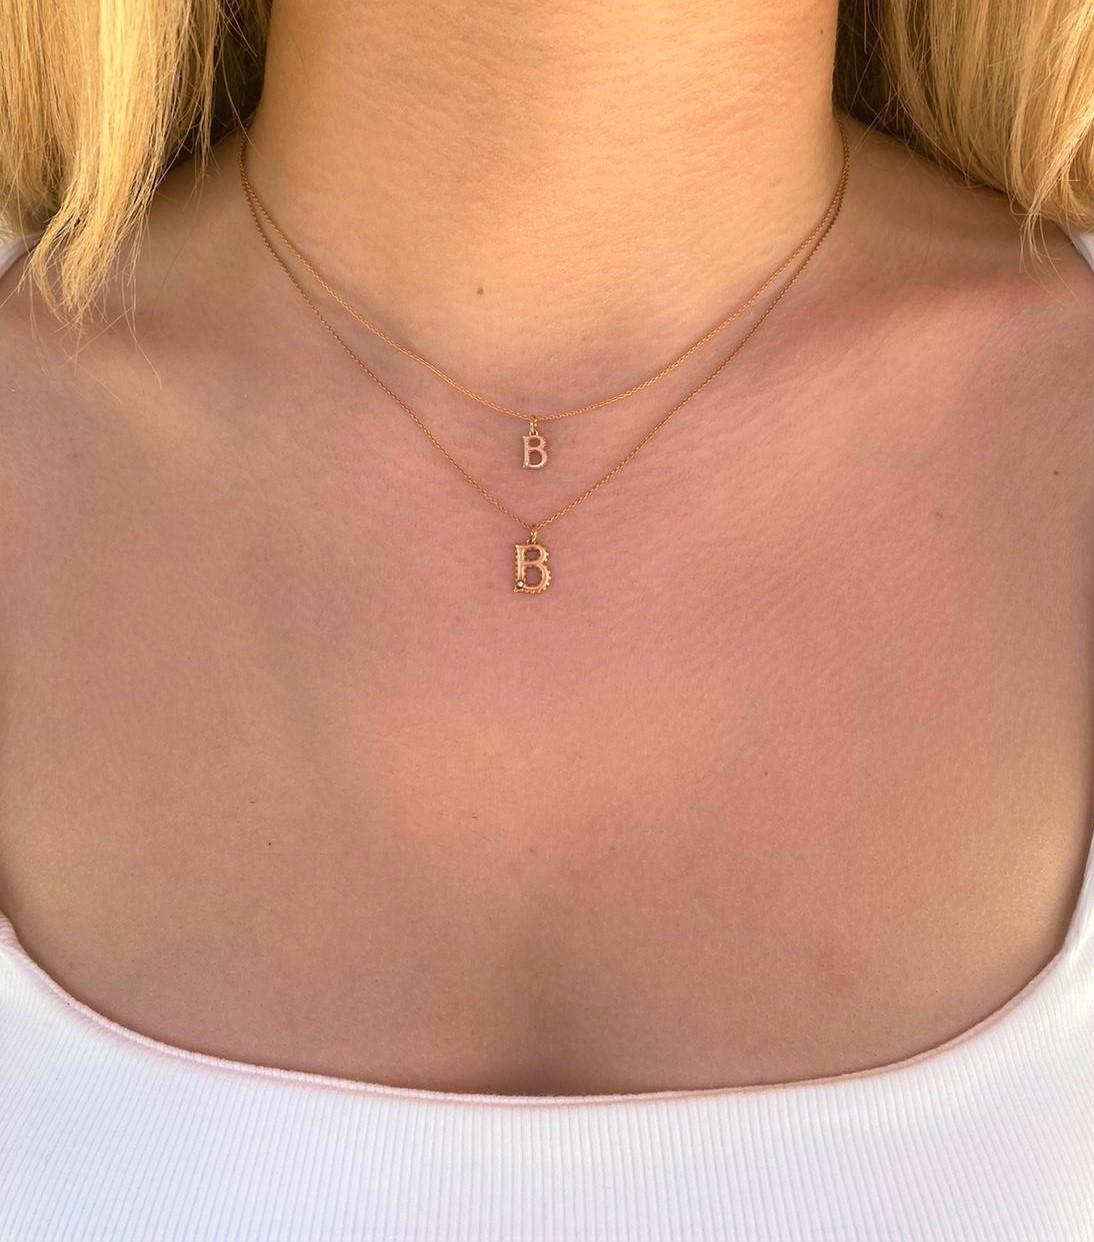 B small necklace in 14k rose gold with 0.01ct white diamond by selda jewellery

Additional Information:-
Collection: Letter collection
14K Rose gold
0.01ct White diamond
Pendant height 0.7cm
Chain length 44cm